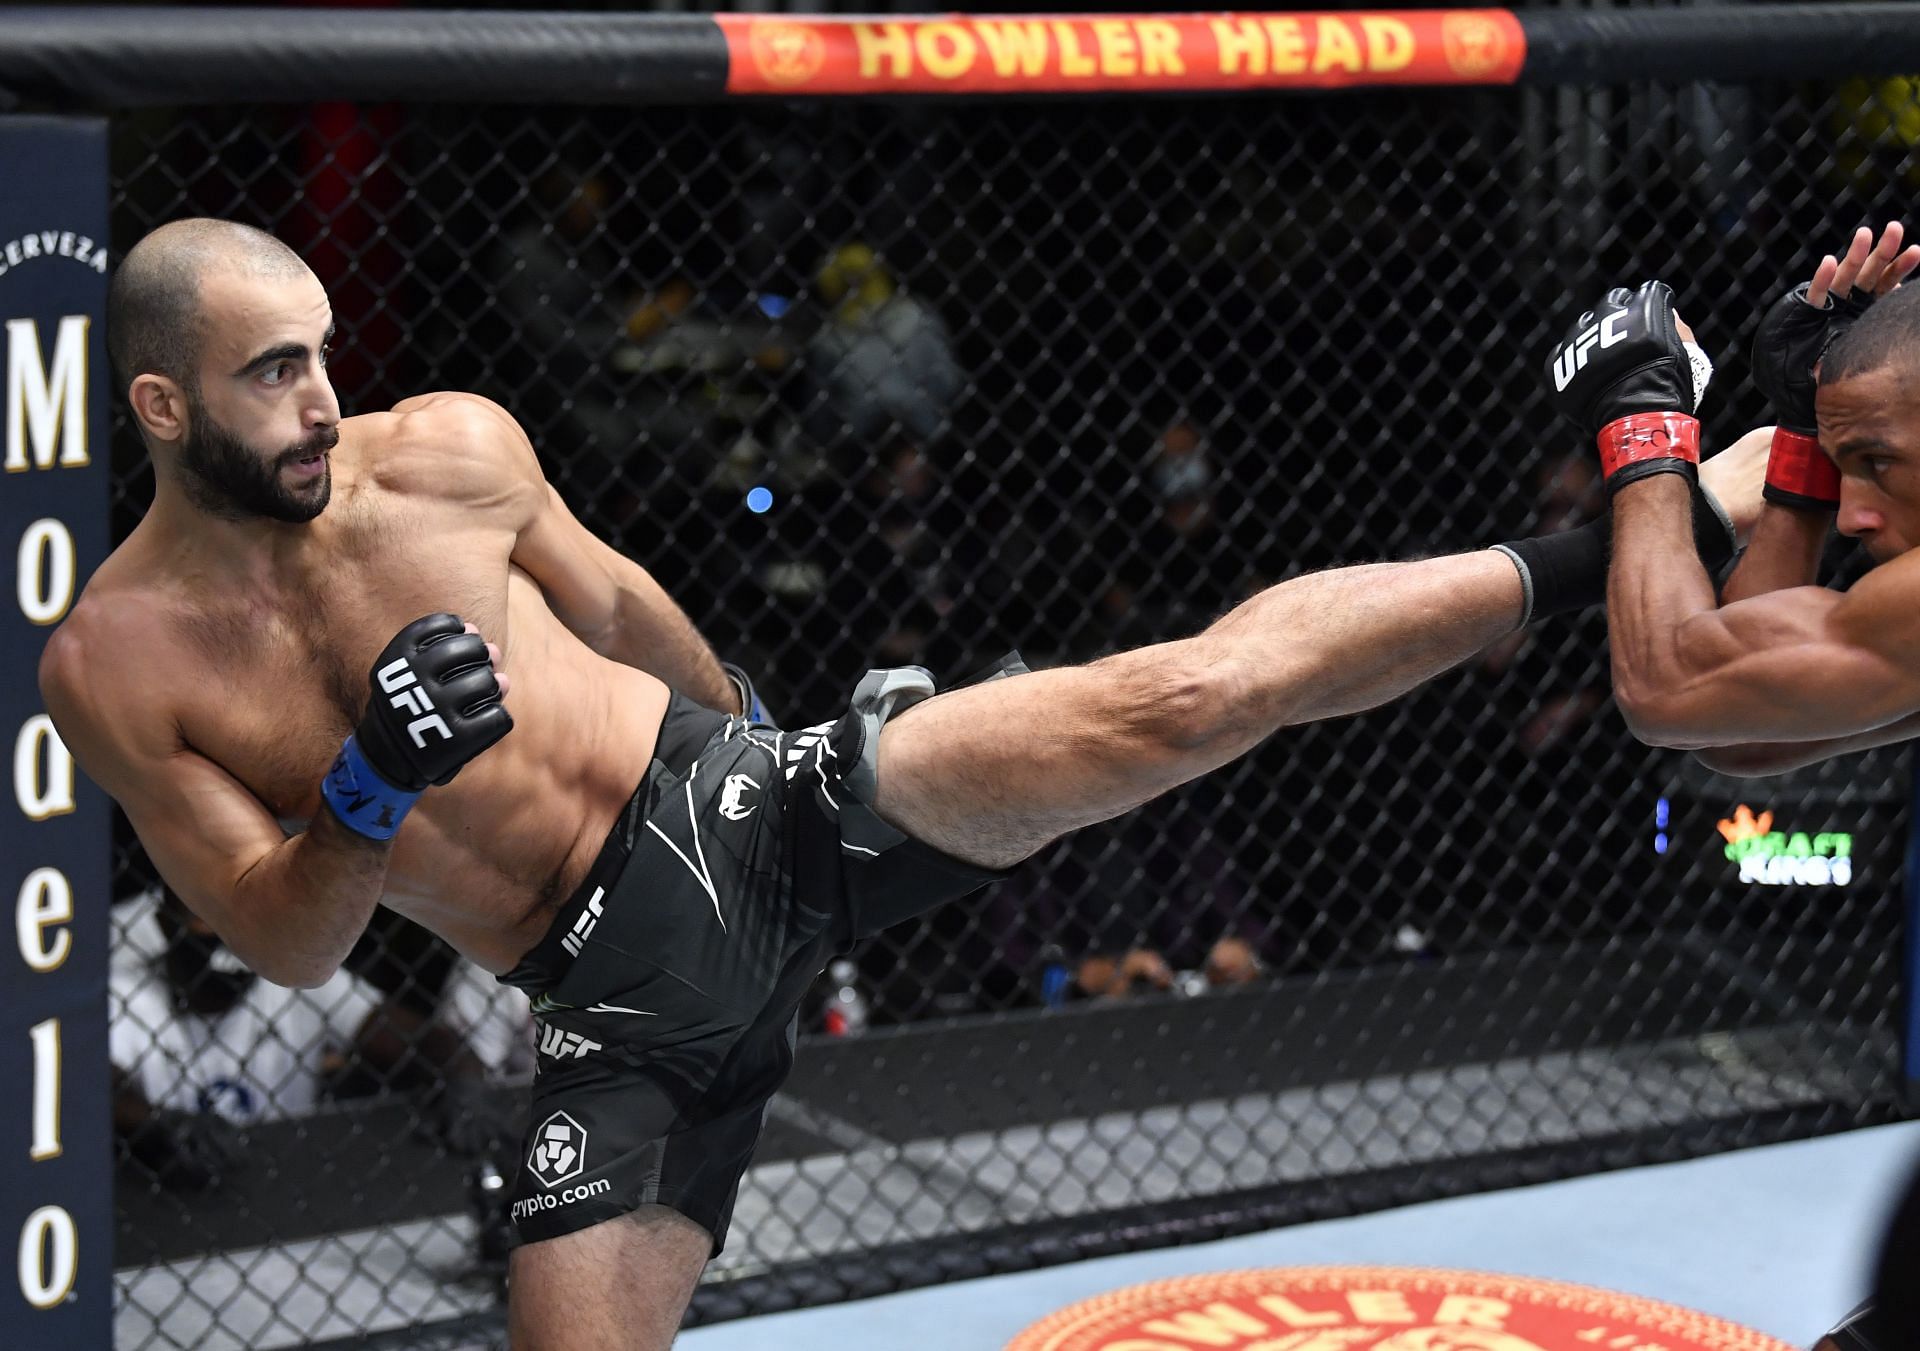 Giga Chikadze could regain his spot as the best featherweight prospect in the UFC with a win over Movsar Evloev